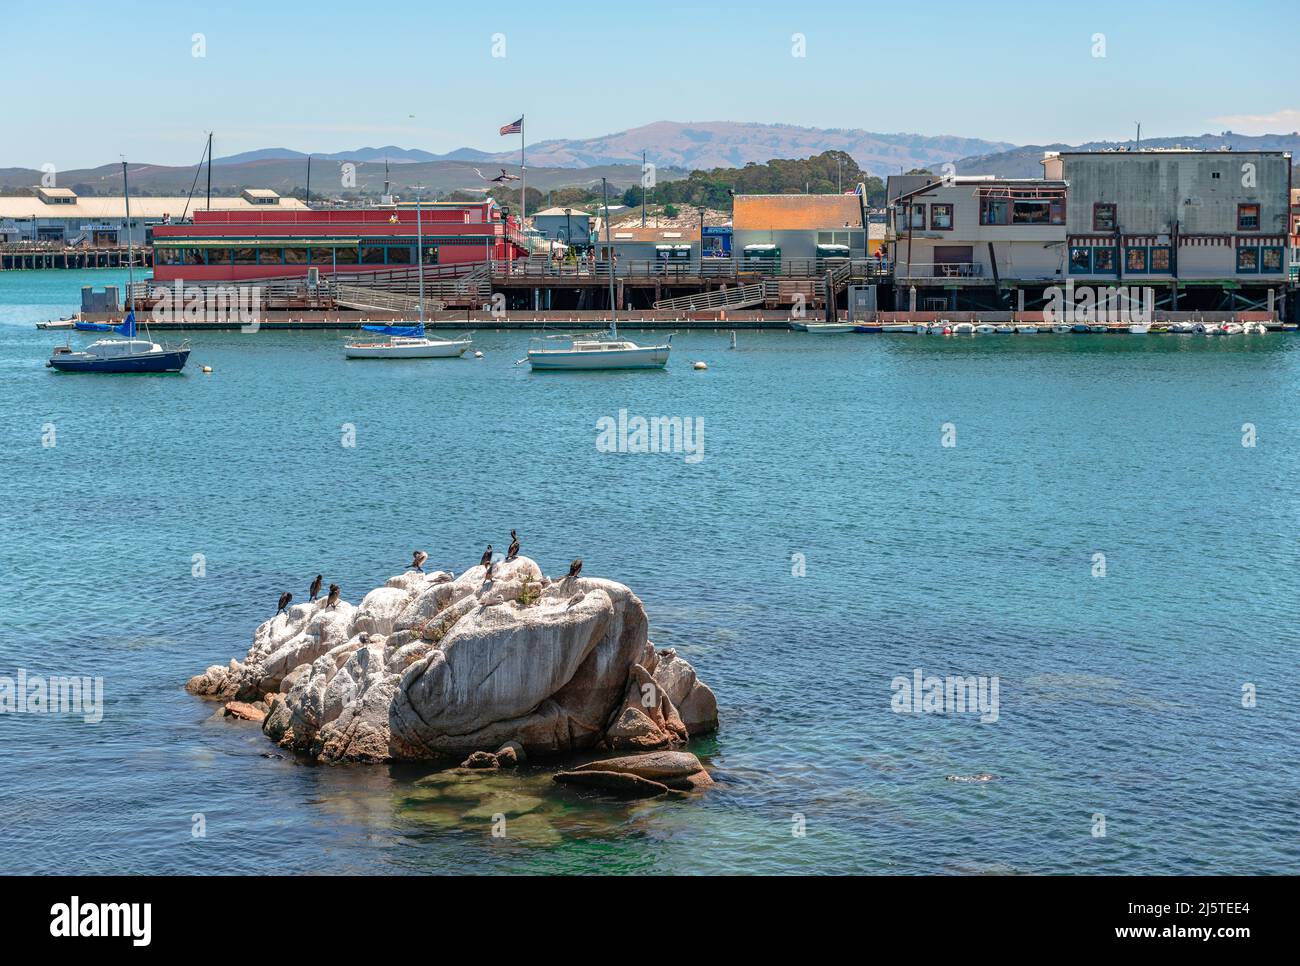 Monterey, CA, USA - July 18 2015: Seagulls rest on a rock with the Old Fisherman's Wharf in the background. Stock Photo